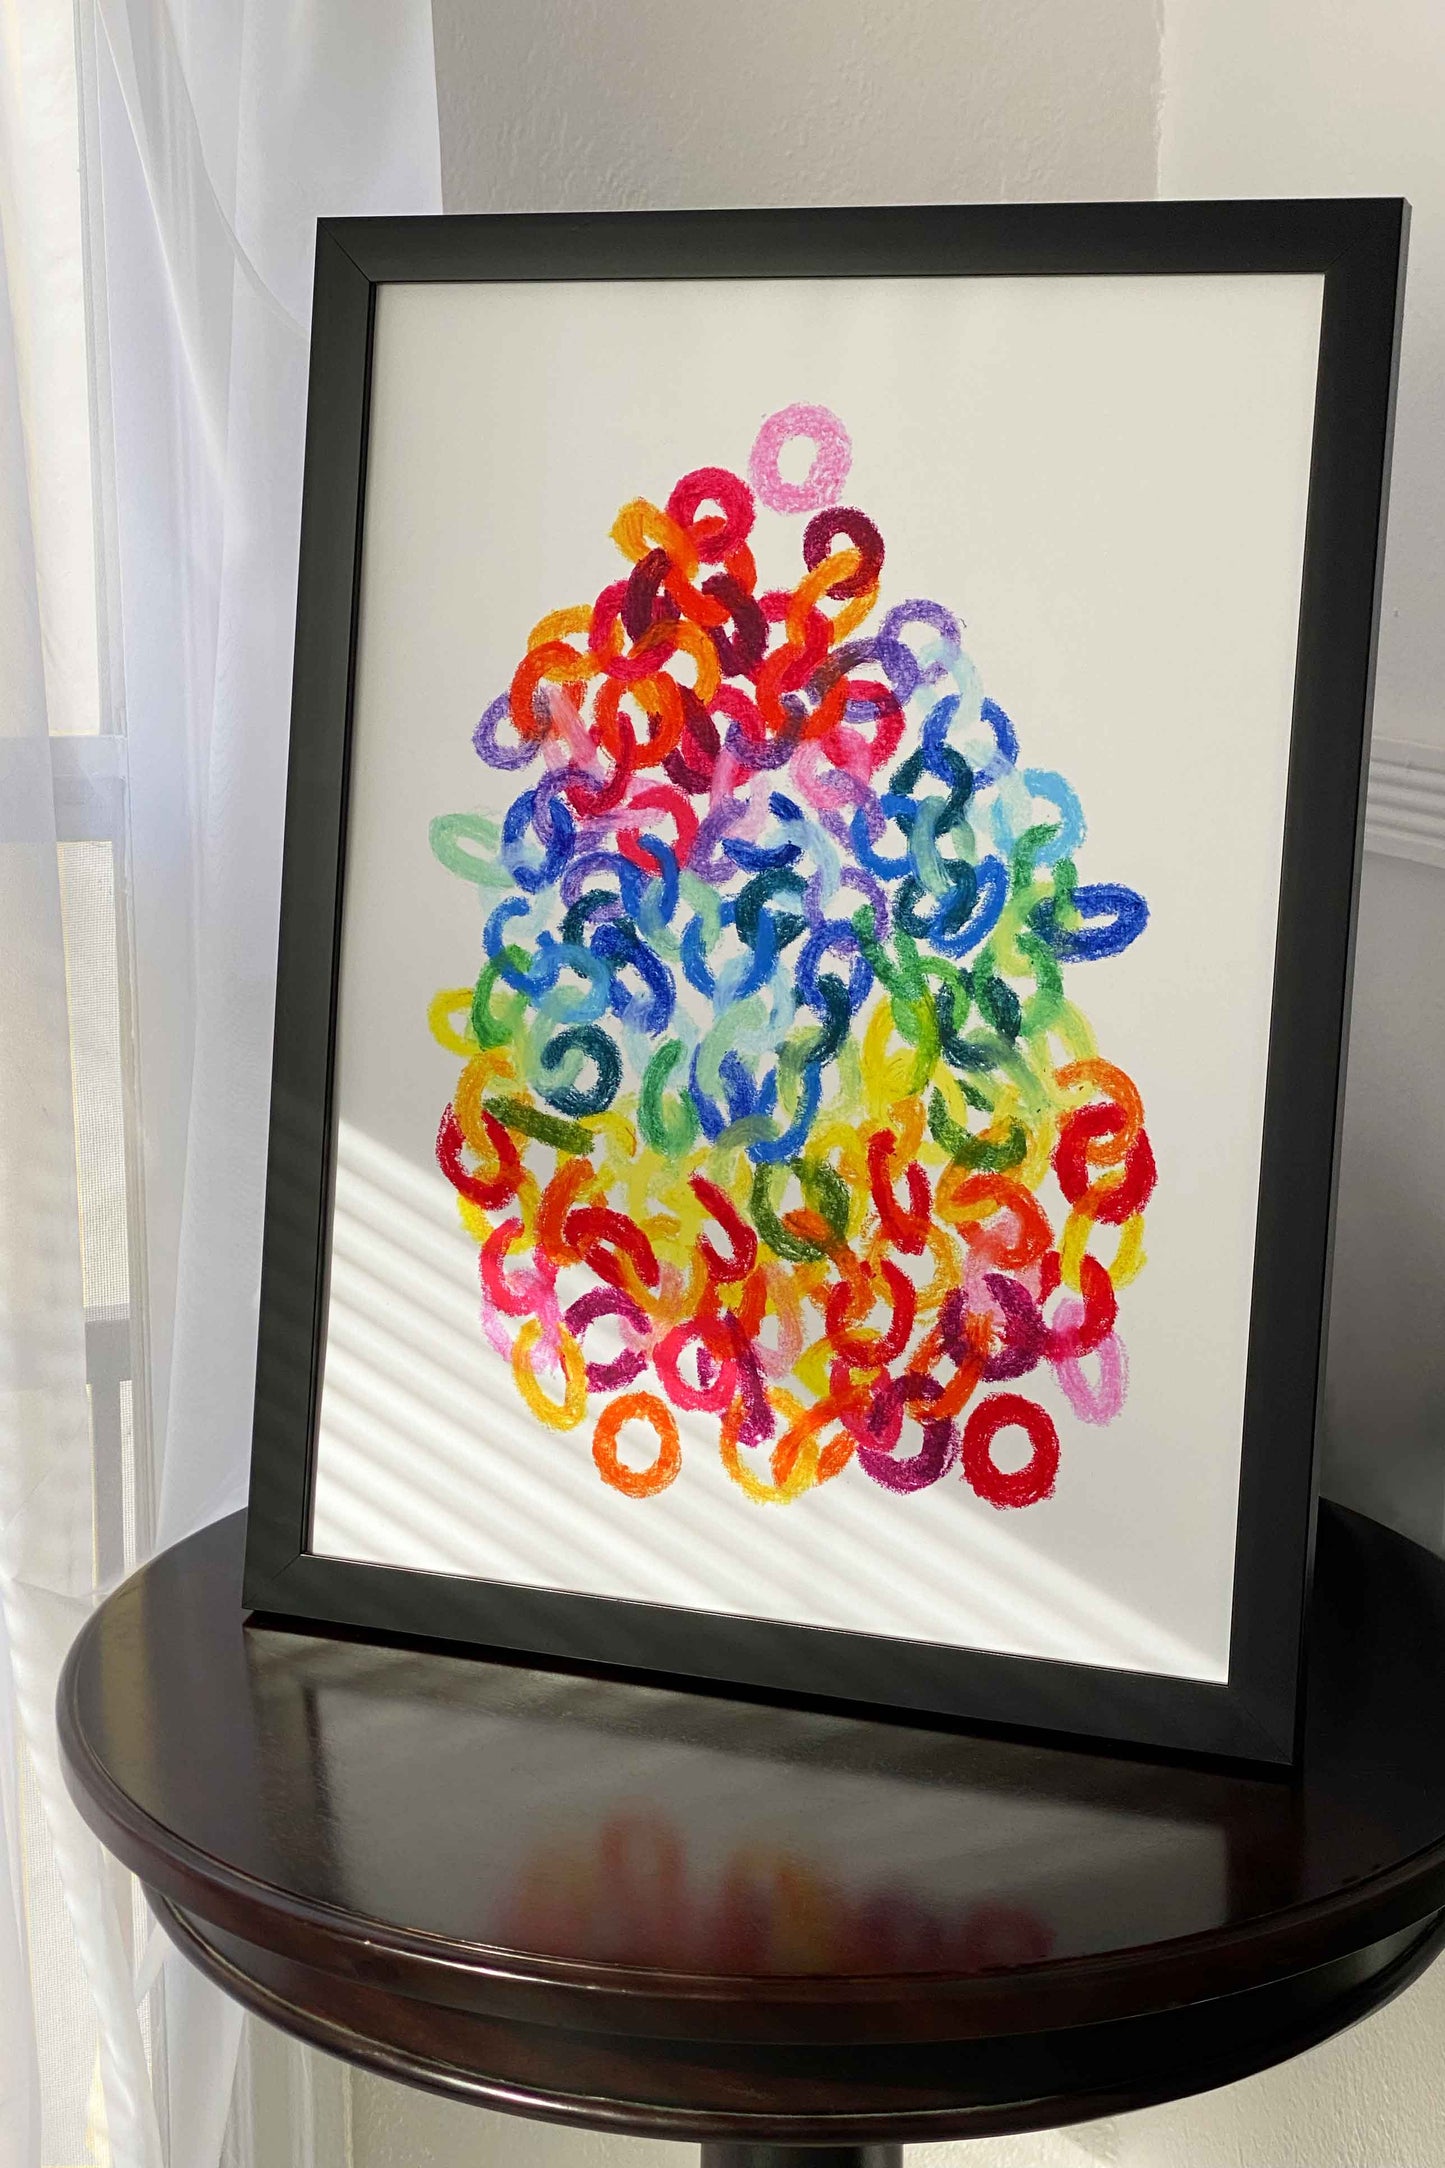 Fruit Loops Limited Edition Print